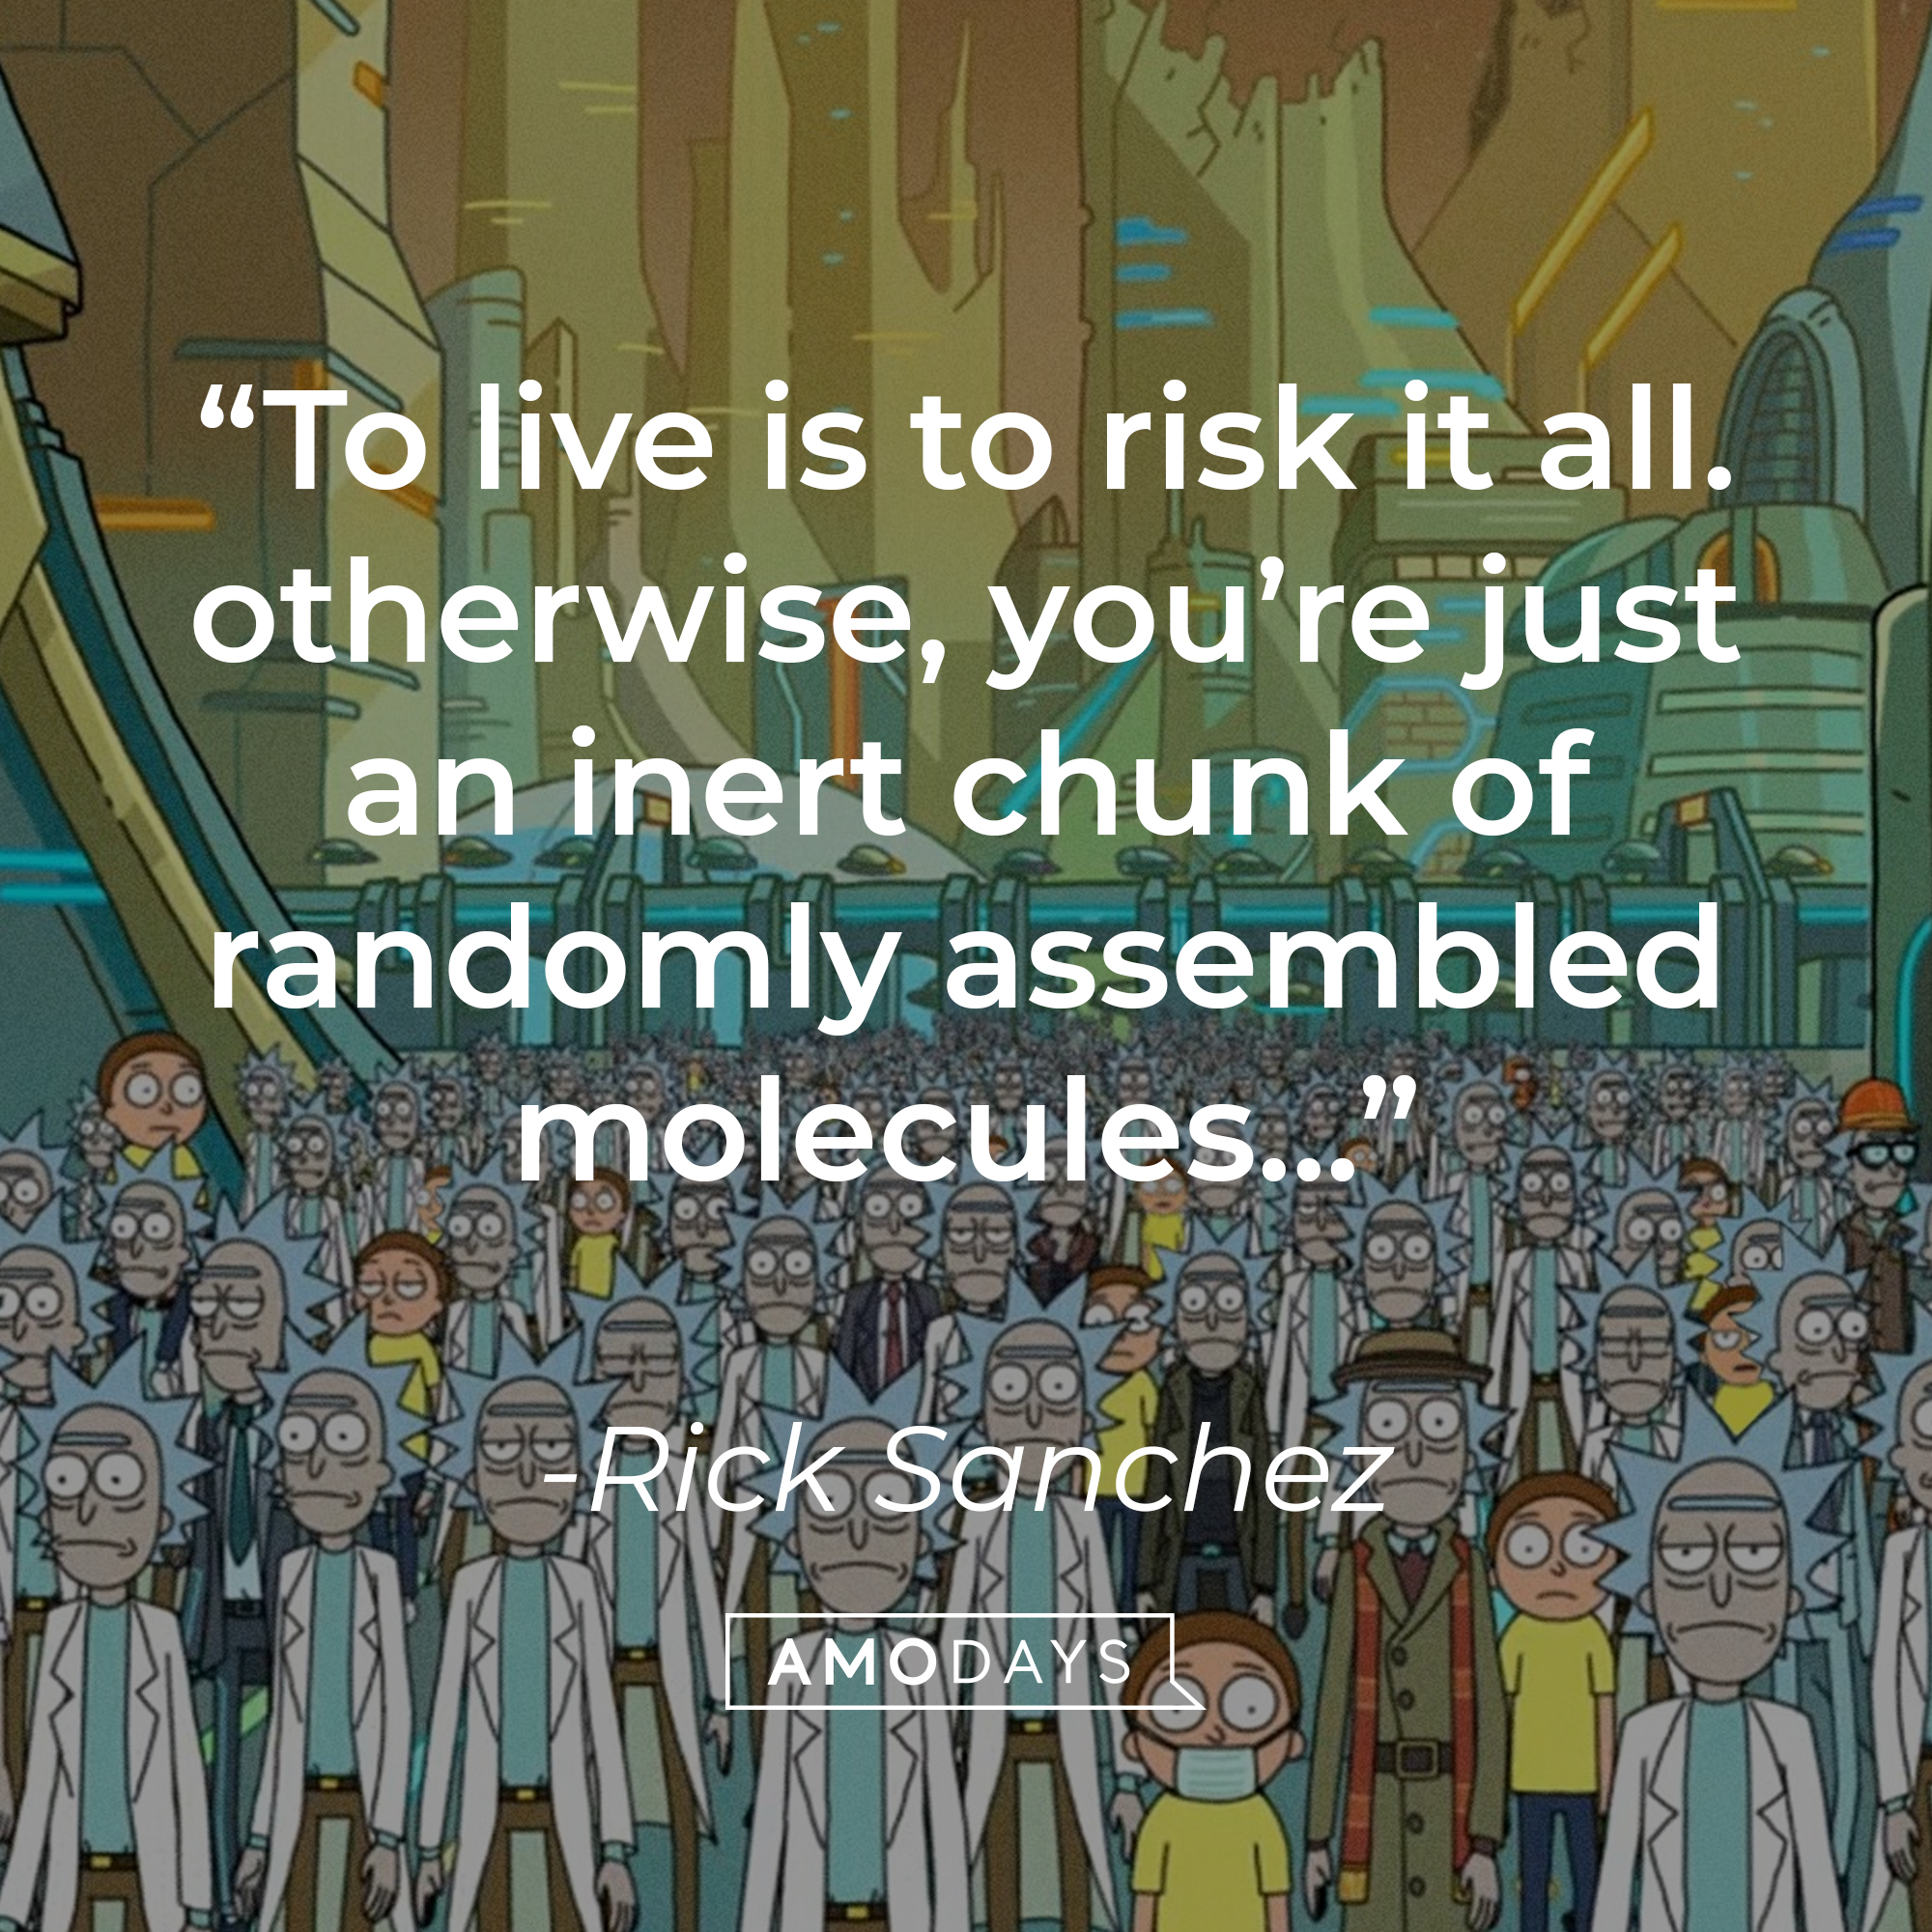 Multiple Ricks and Mortys with Rick Sanchez’s quote: “To live is to risk it all. Otherwise, you’re just an inert chunk of randomly assembled molecules...” | Source: Facebook.com/RickandMorty